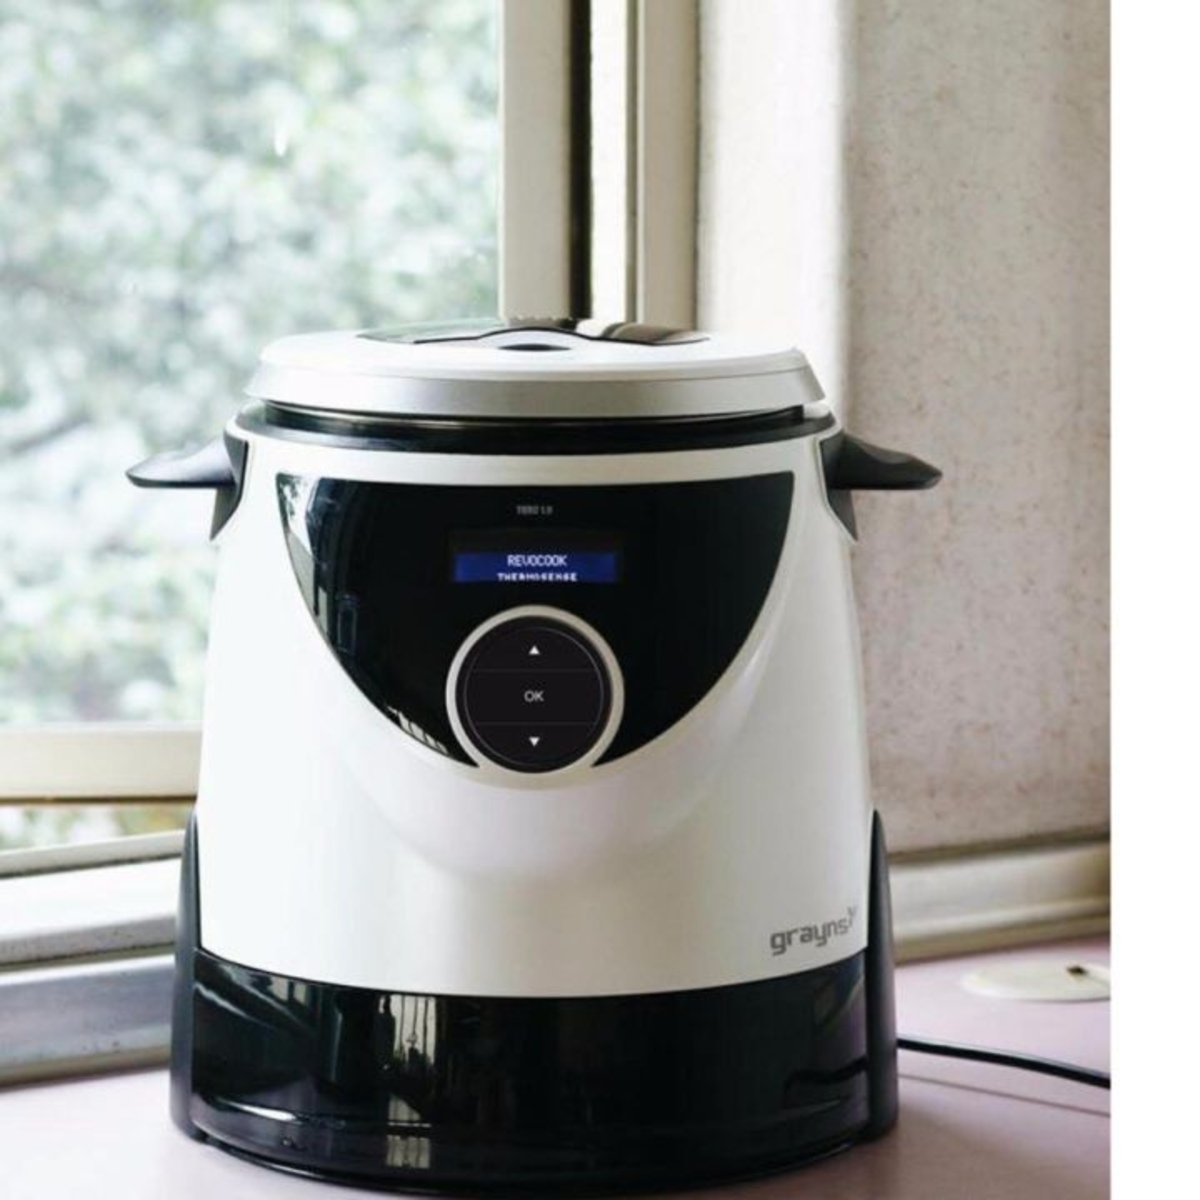 13 Superior Grayns Rice Cooker For 2023